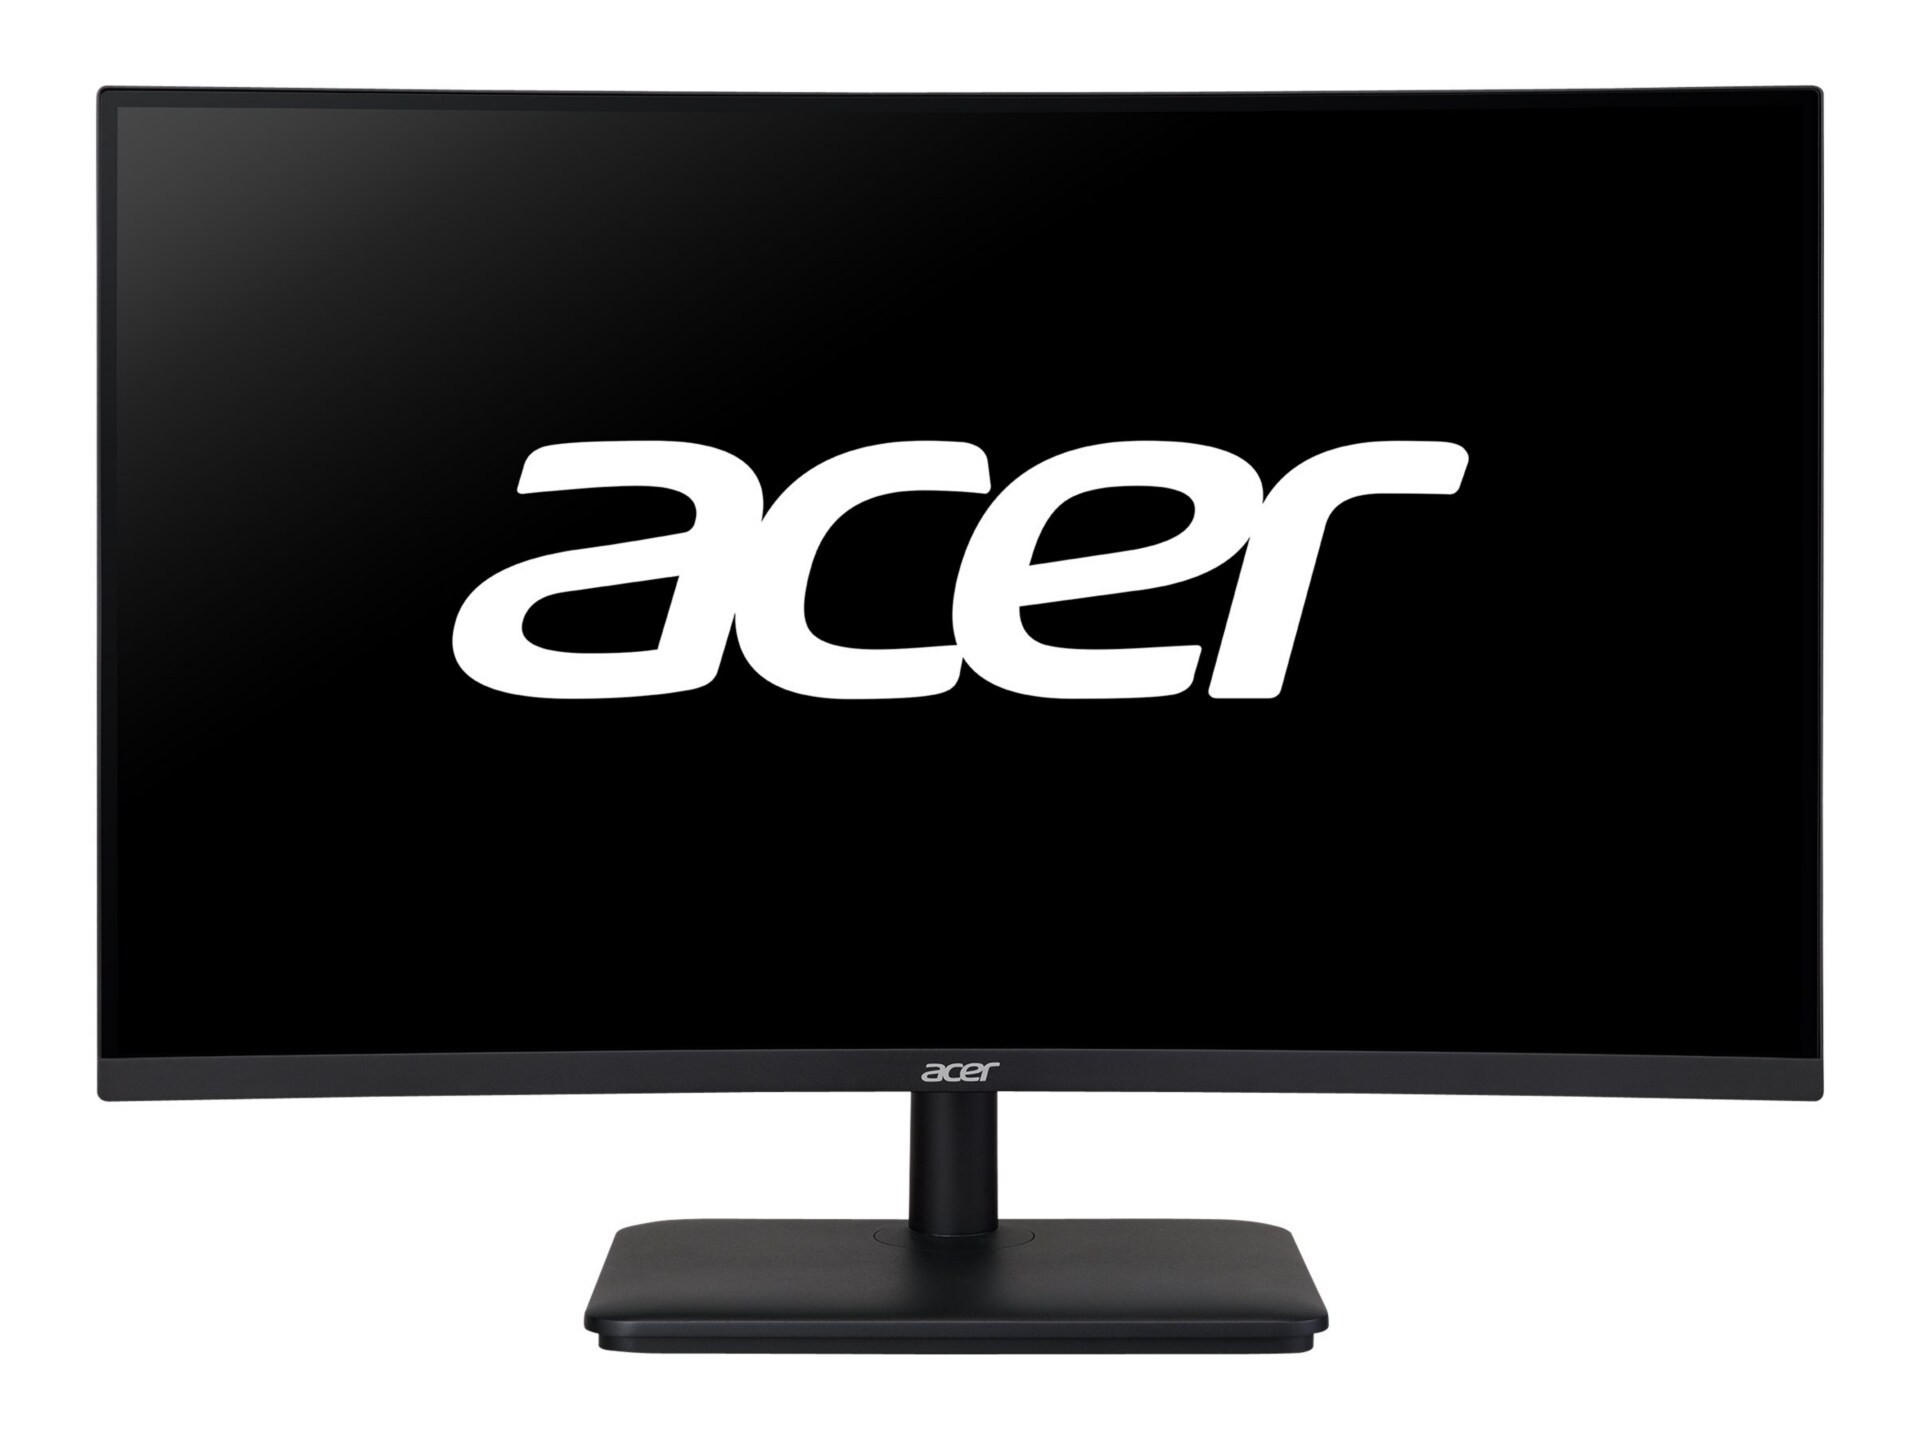 Acer Vbiipx - ED0 Series - LED monitor - curved - Full (1080p) - 27" - HDR - UM.HE0AA.V01 - Computer Monitors -